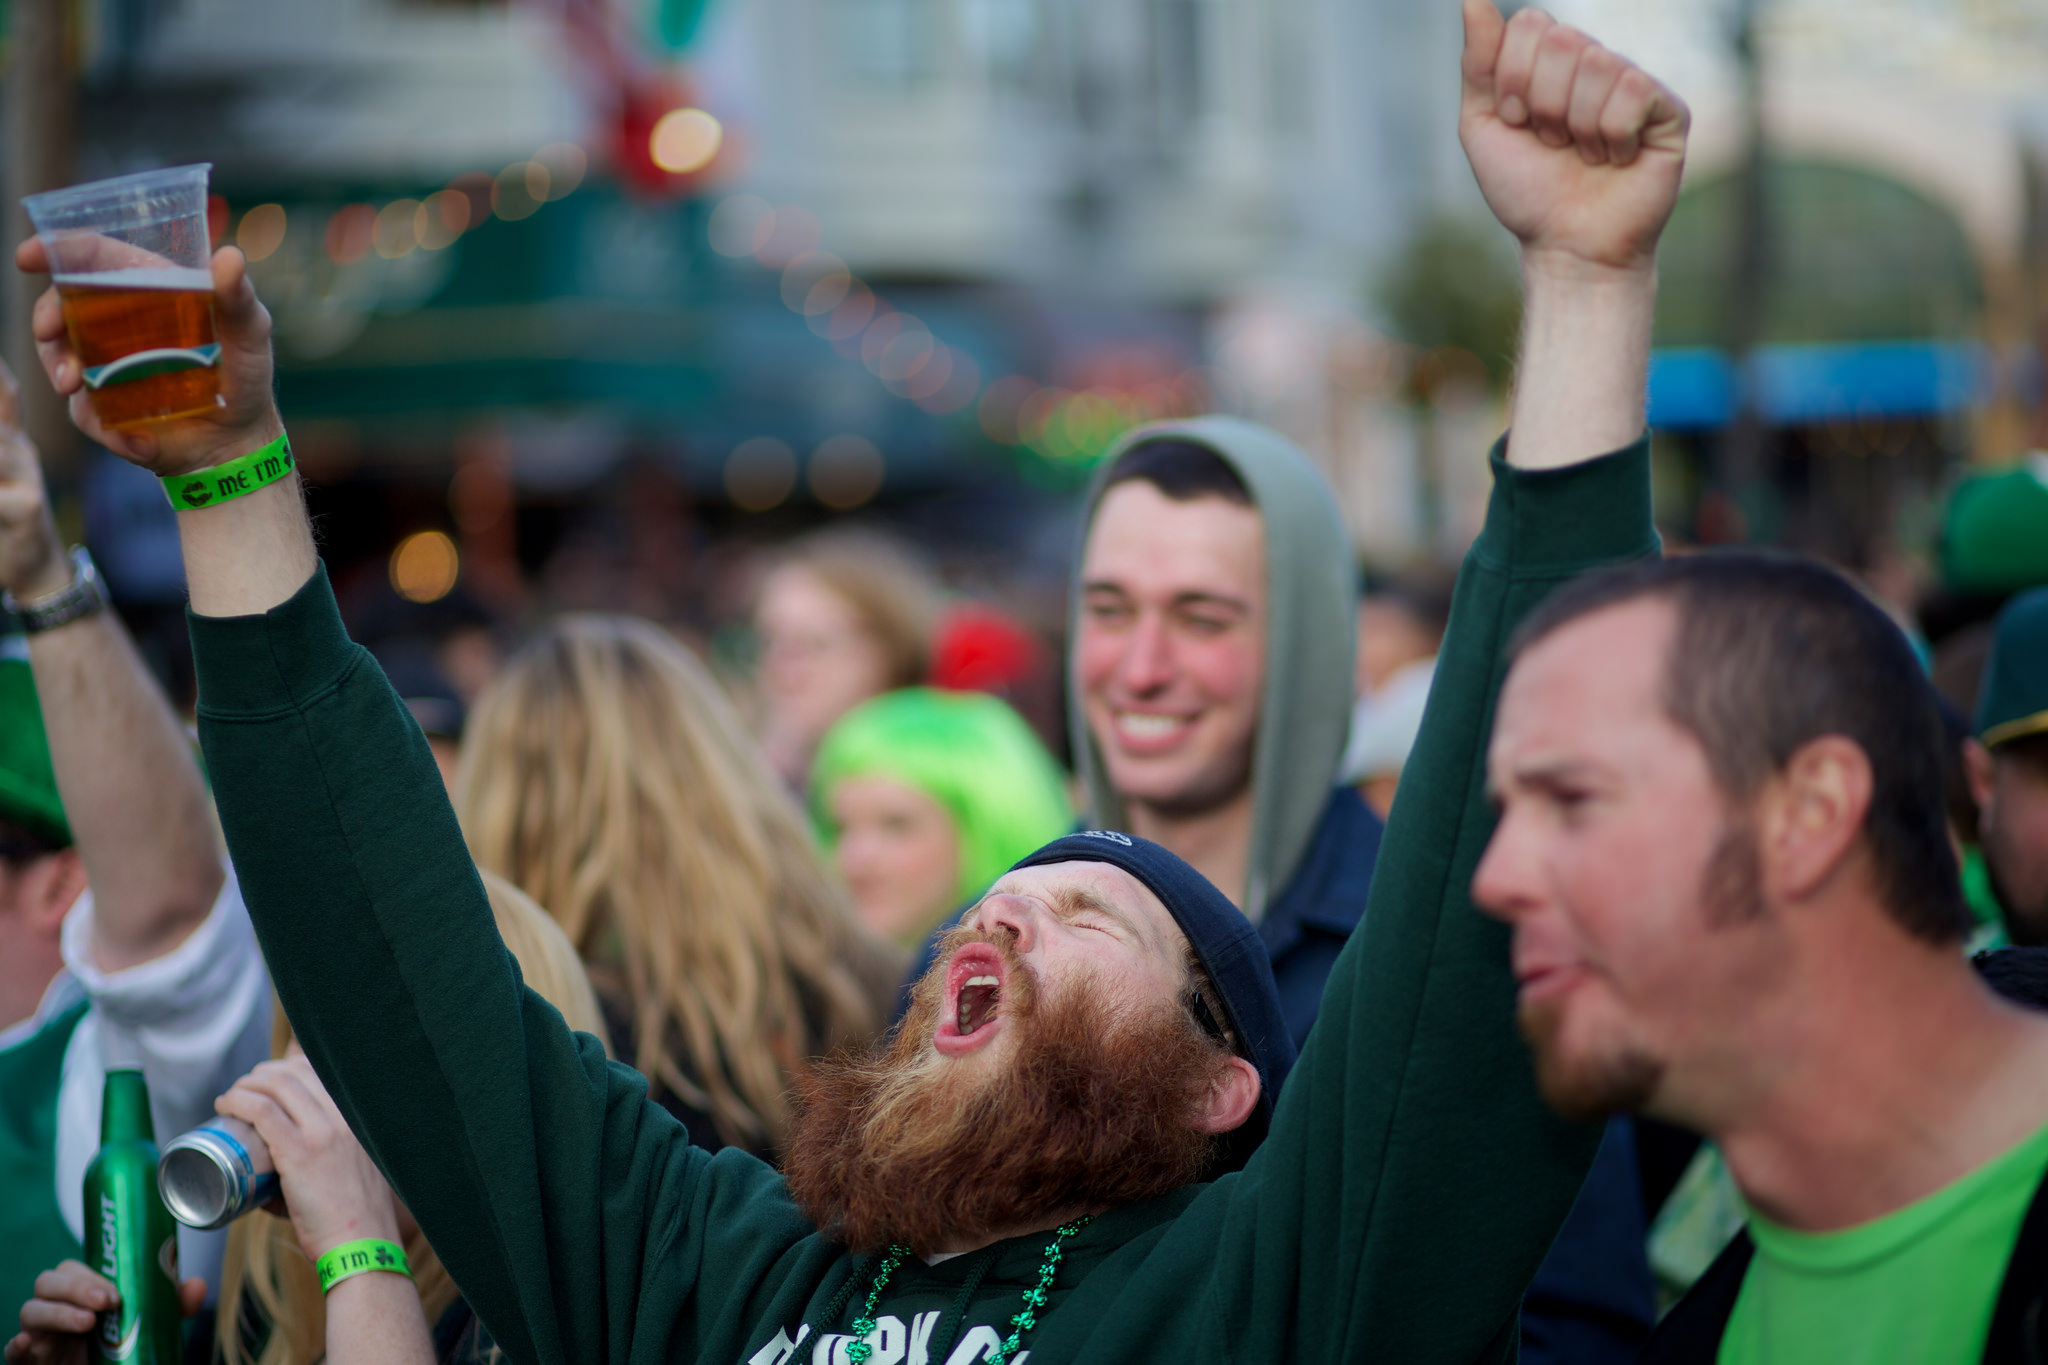 17 excuses for introverts who don’t want to go out on St. Patrick’s Day